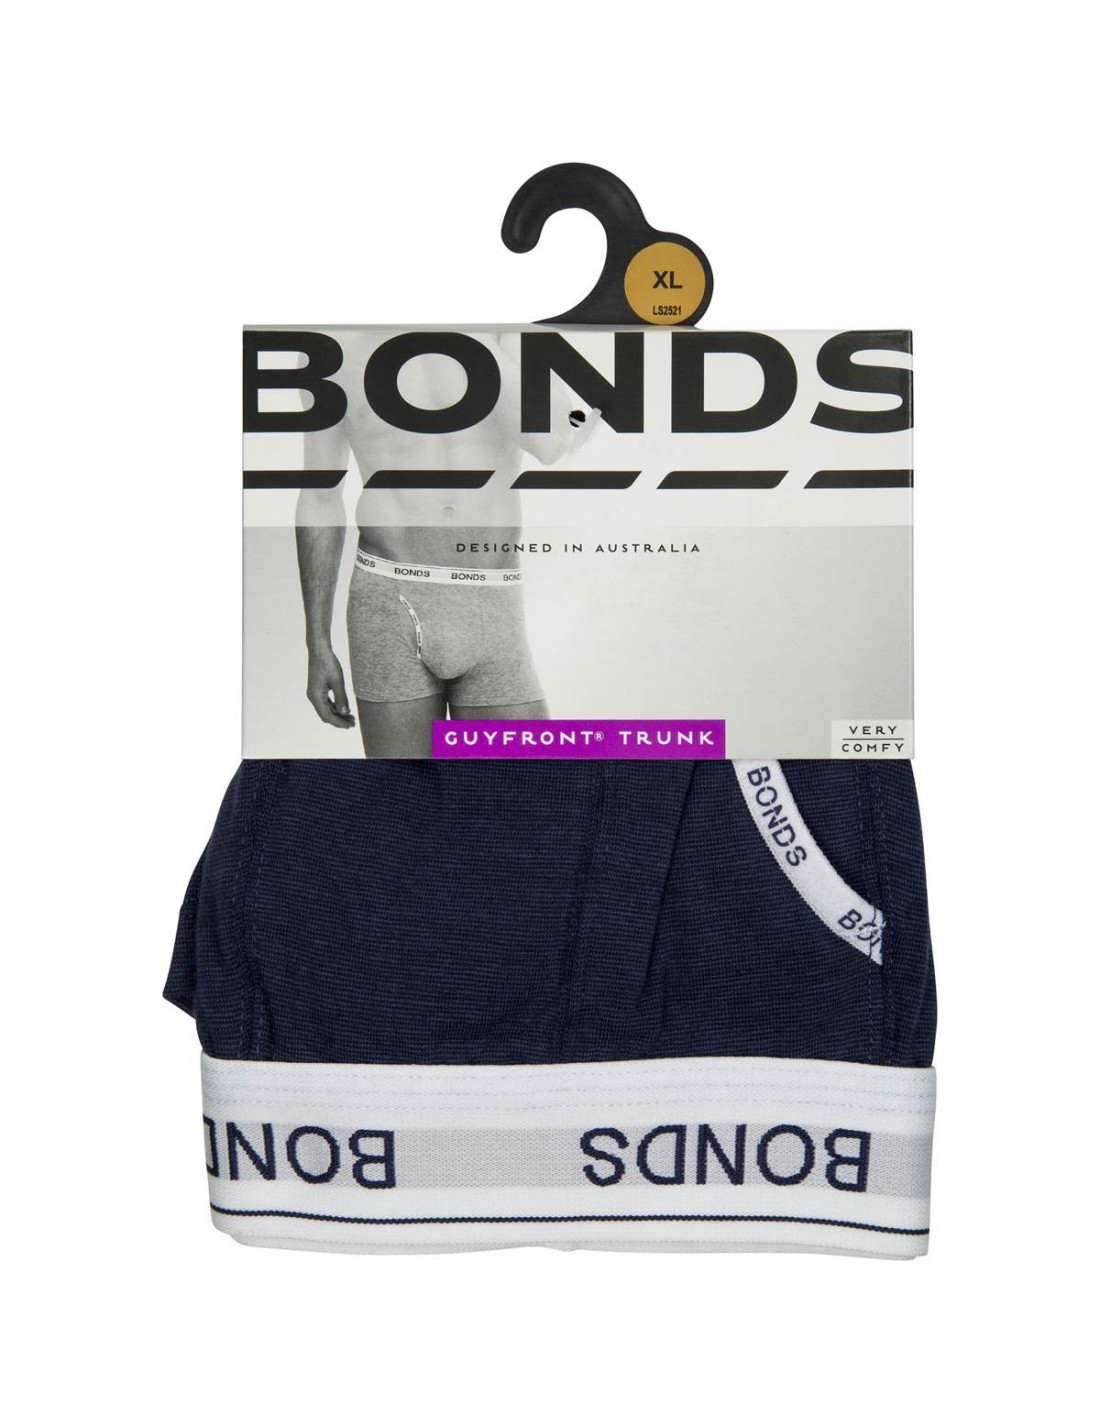 Bonds Mens Underwear Guy Front Trunk Size X Large each | Ally's Bas